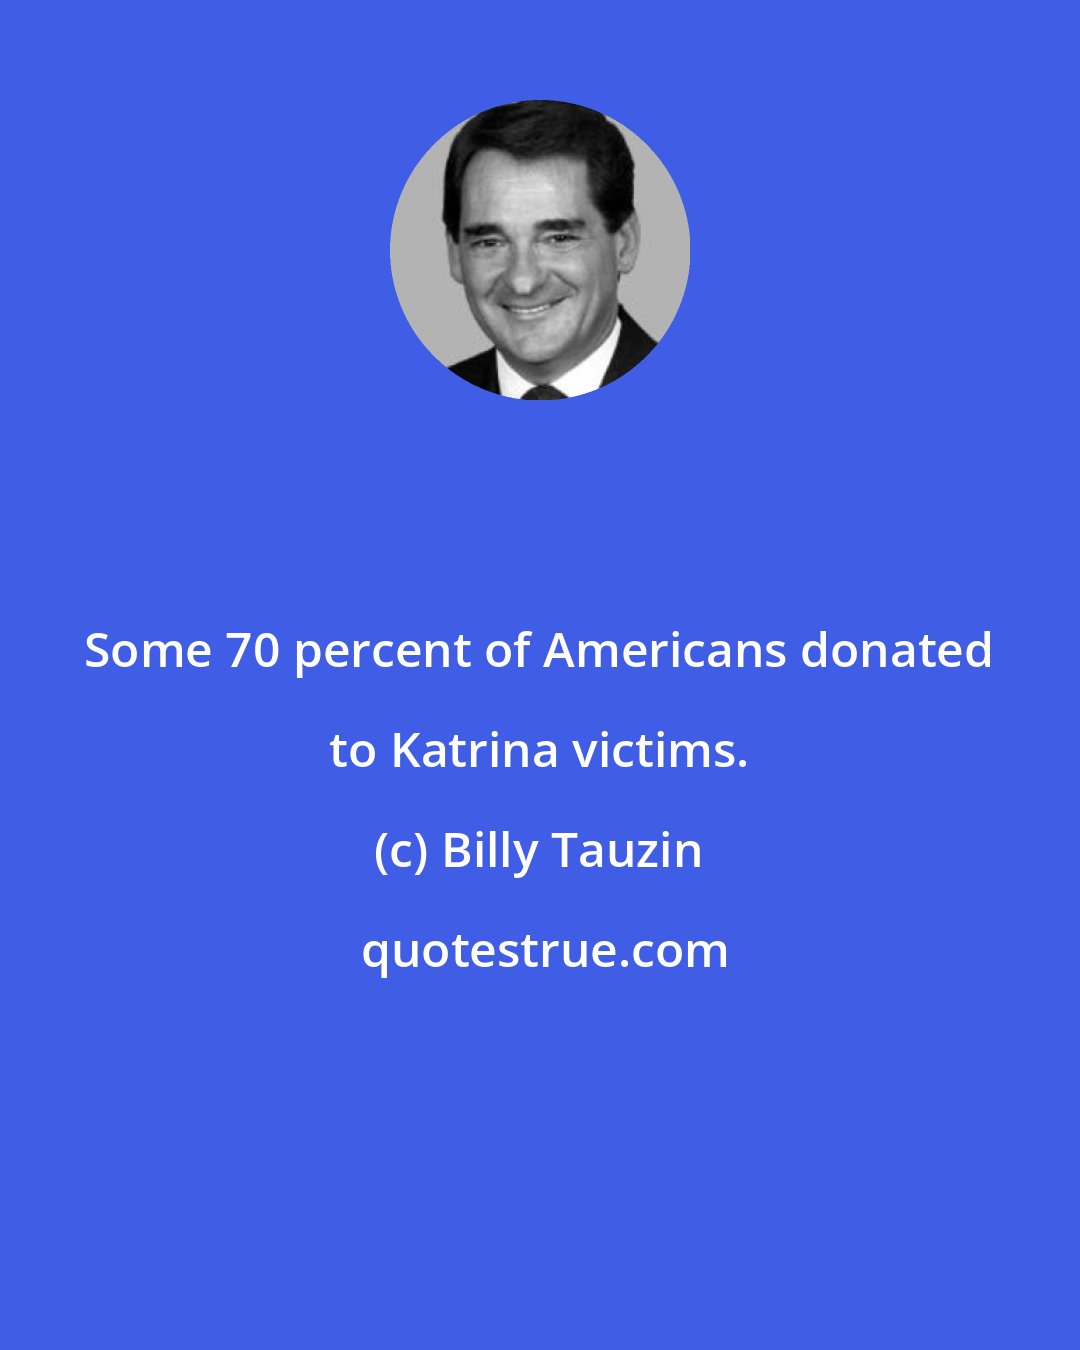 Billy Tauzin: Some 70 percent of Americans donated to Katrina victims.